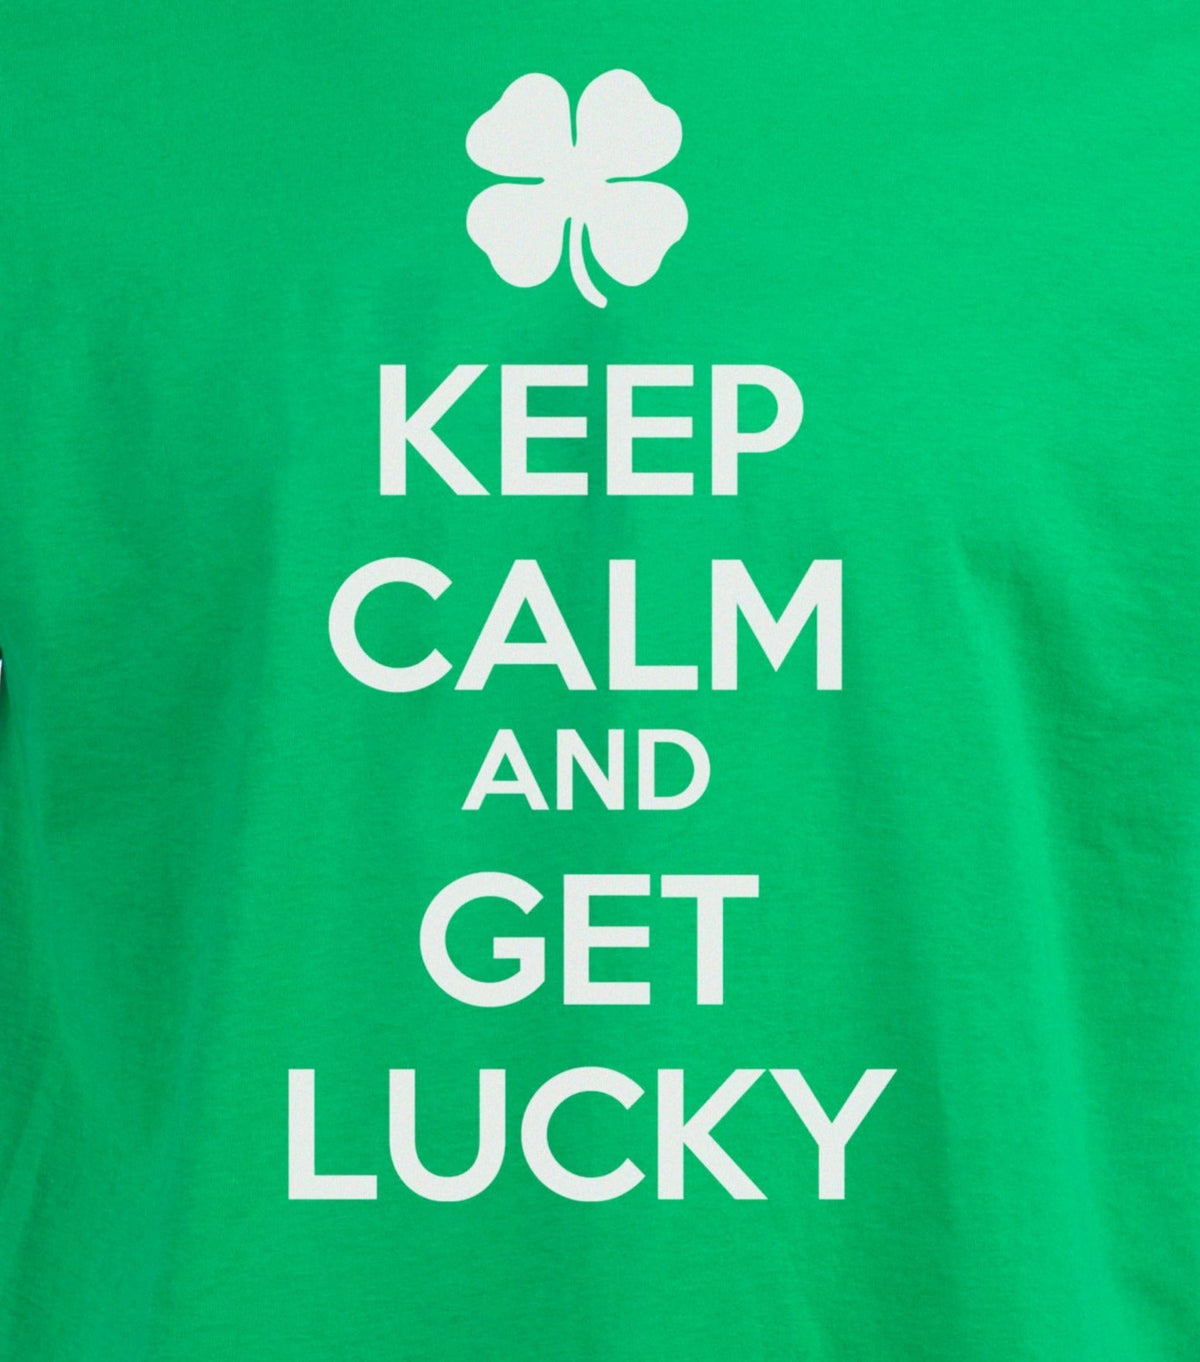 Keep Calm And Get Lucky - St. Patrick's Day Good Luck Funny T-shirt - Women's